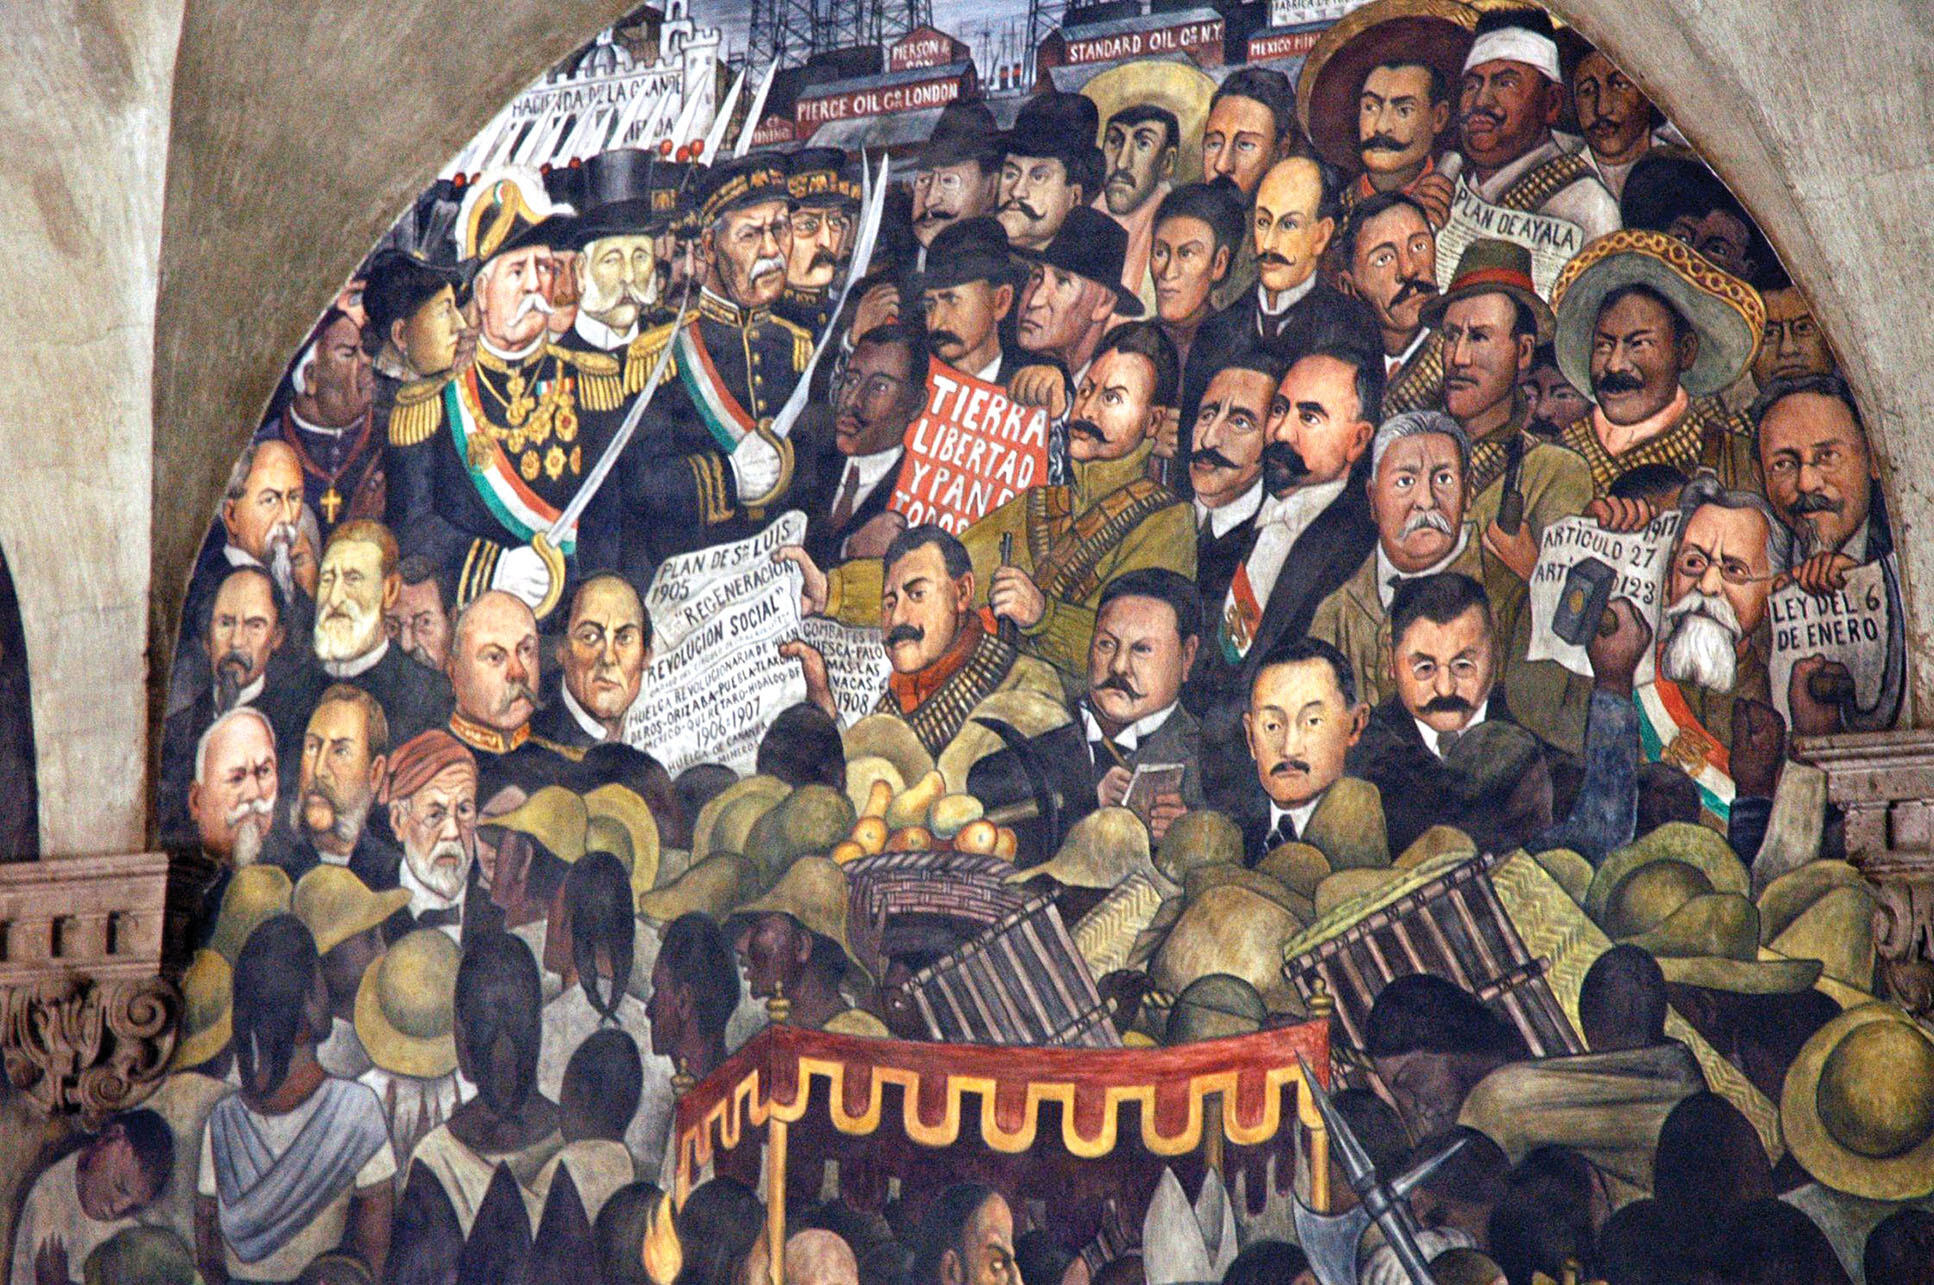 A section of Diego Rivera’s mural in Mexico’s National Palace, which depicts supporters of Porfirio Diáz on the left and leading revolutionaries on the right. (Photo courtesy of imgkid.)